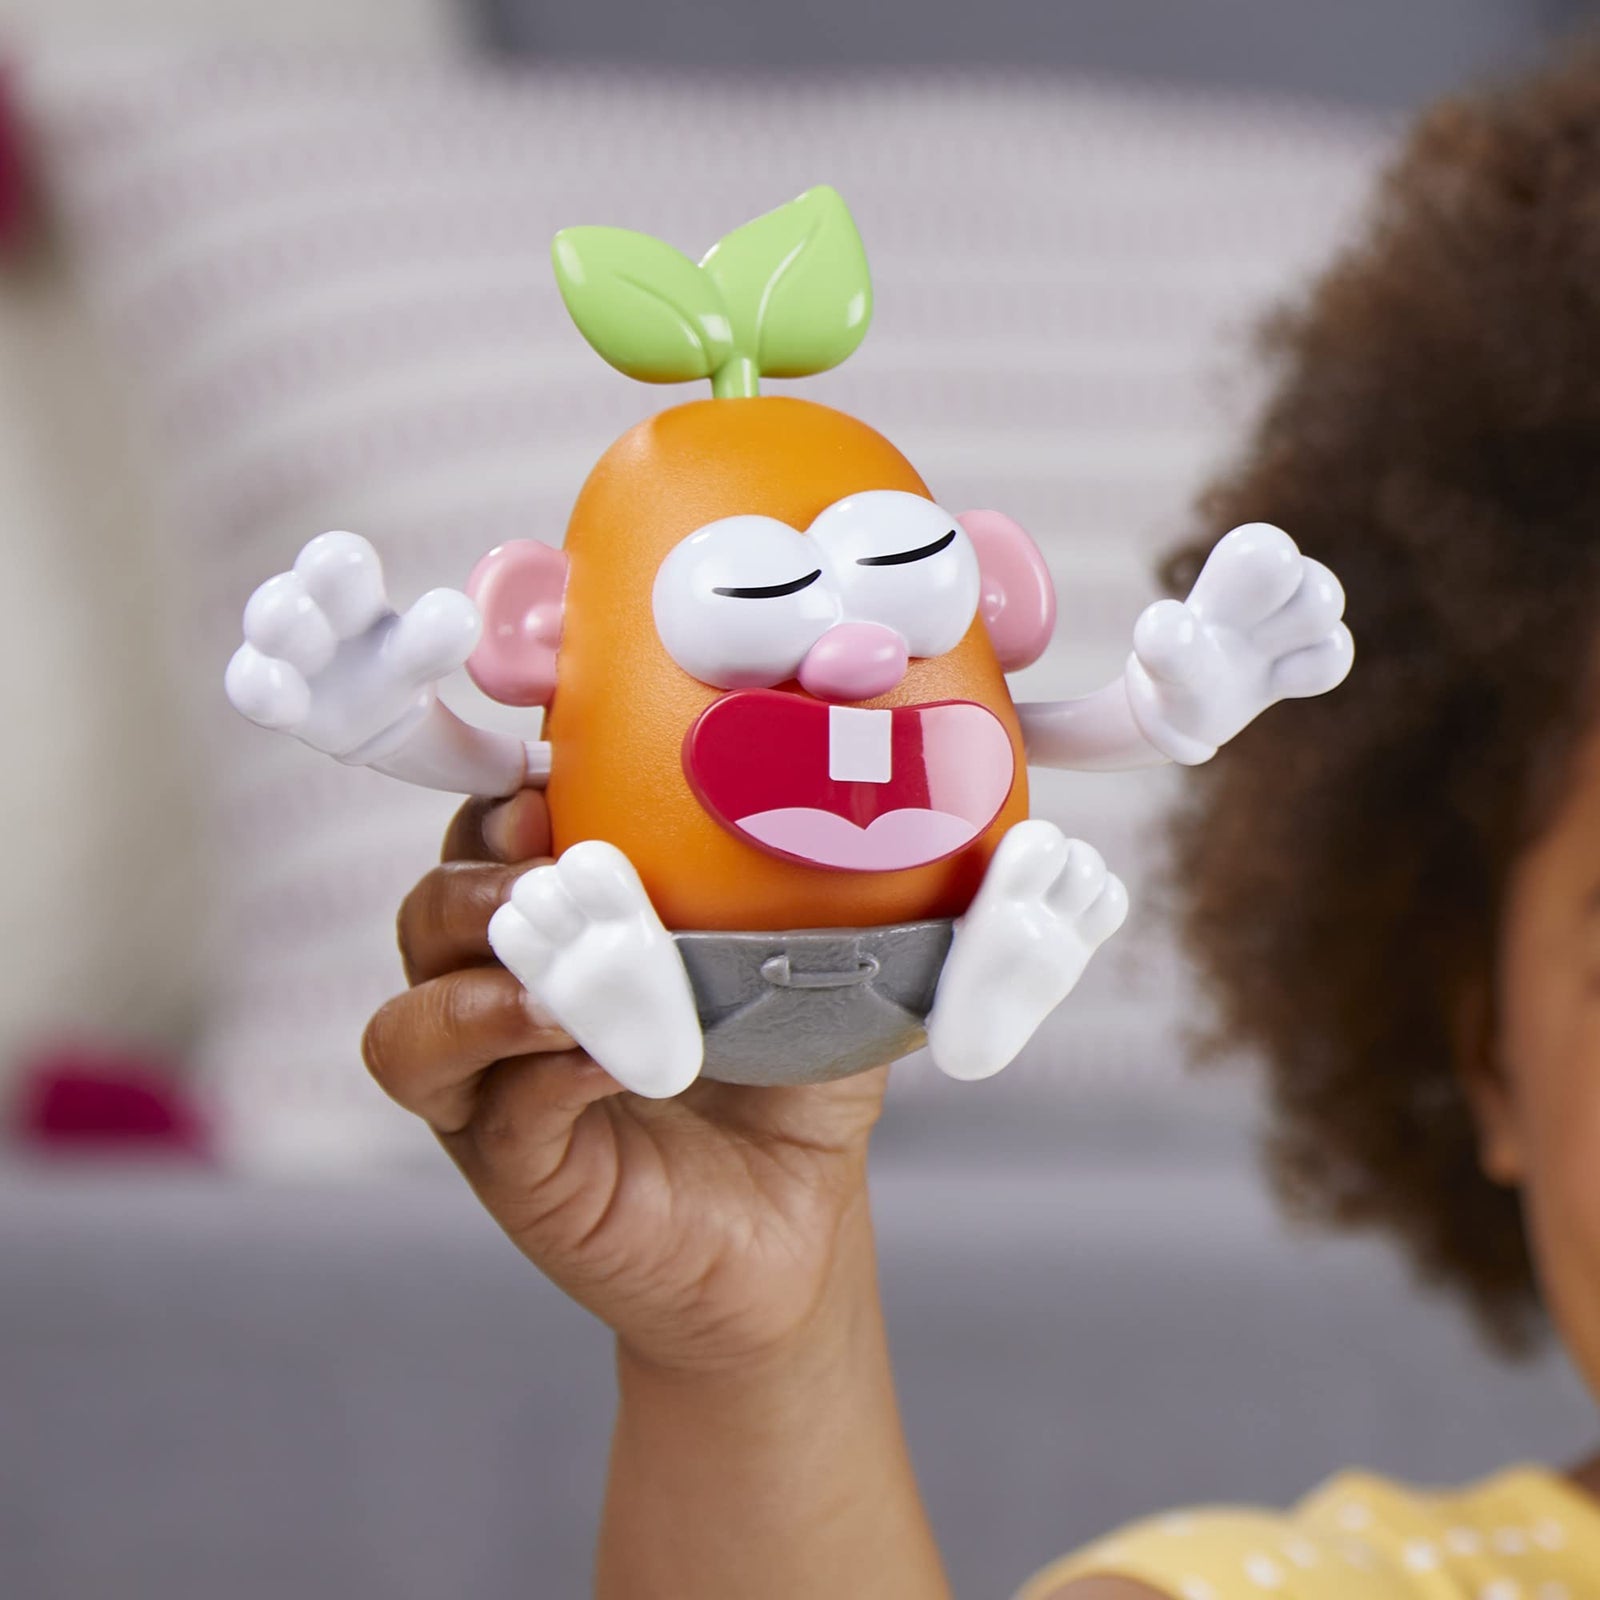 Mr Potato Head Create Your Potato Head Family Toy for Kids Ages 2 and Up, Includes 45 Pieces to Create and Customize Potato Families